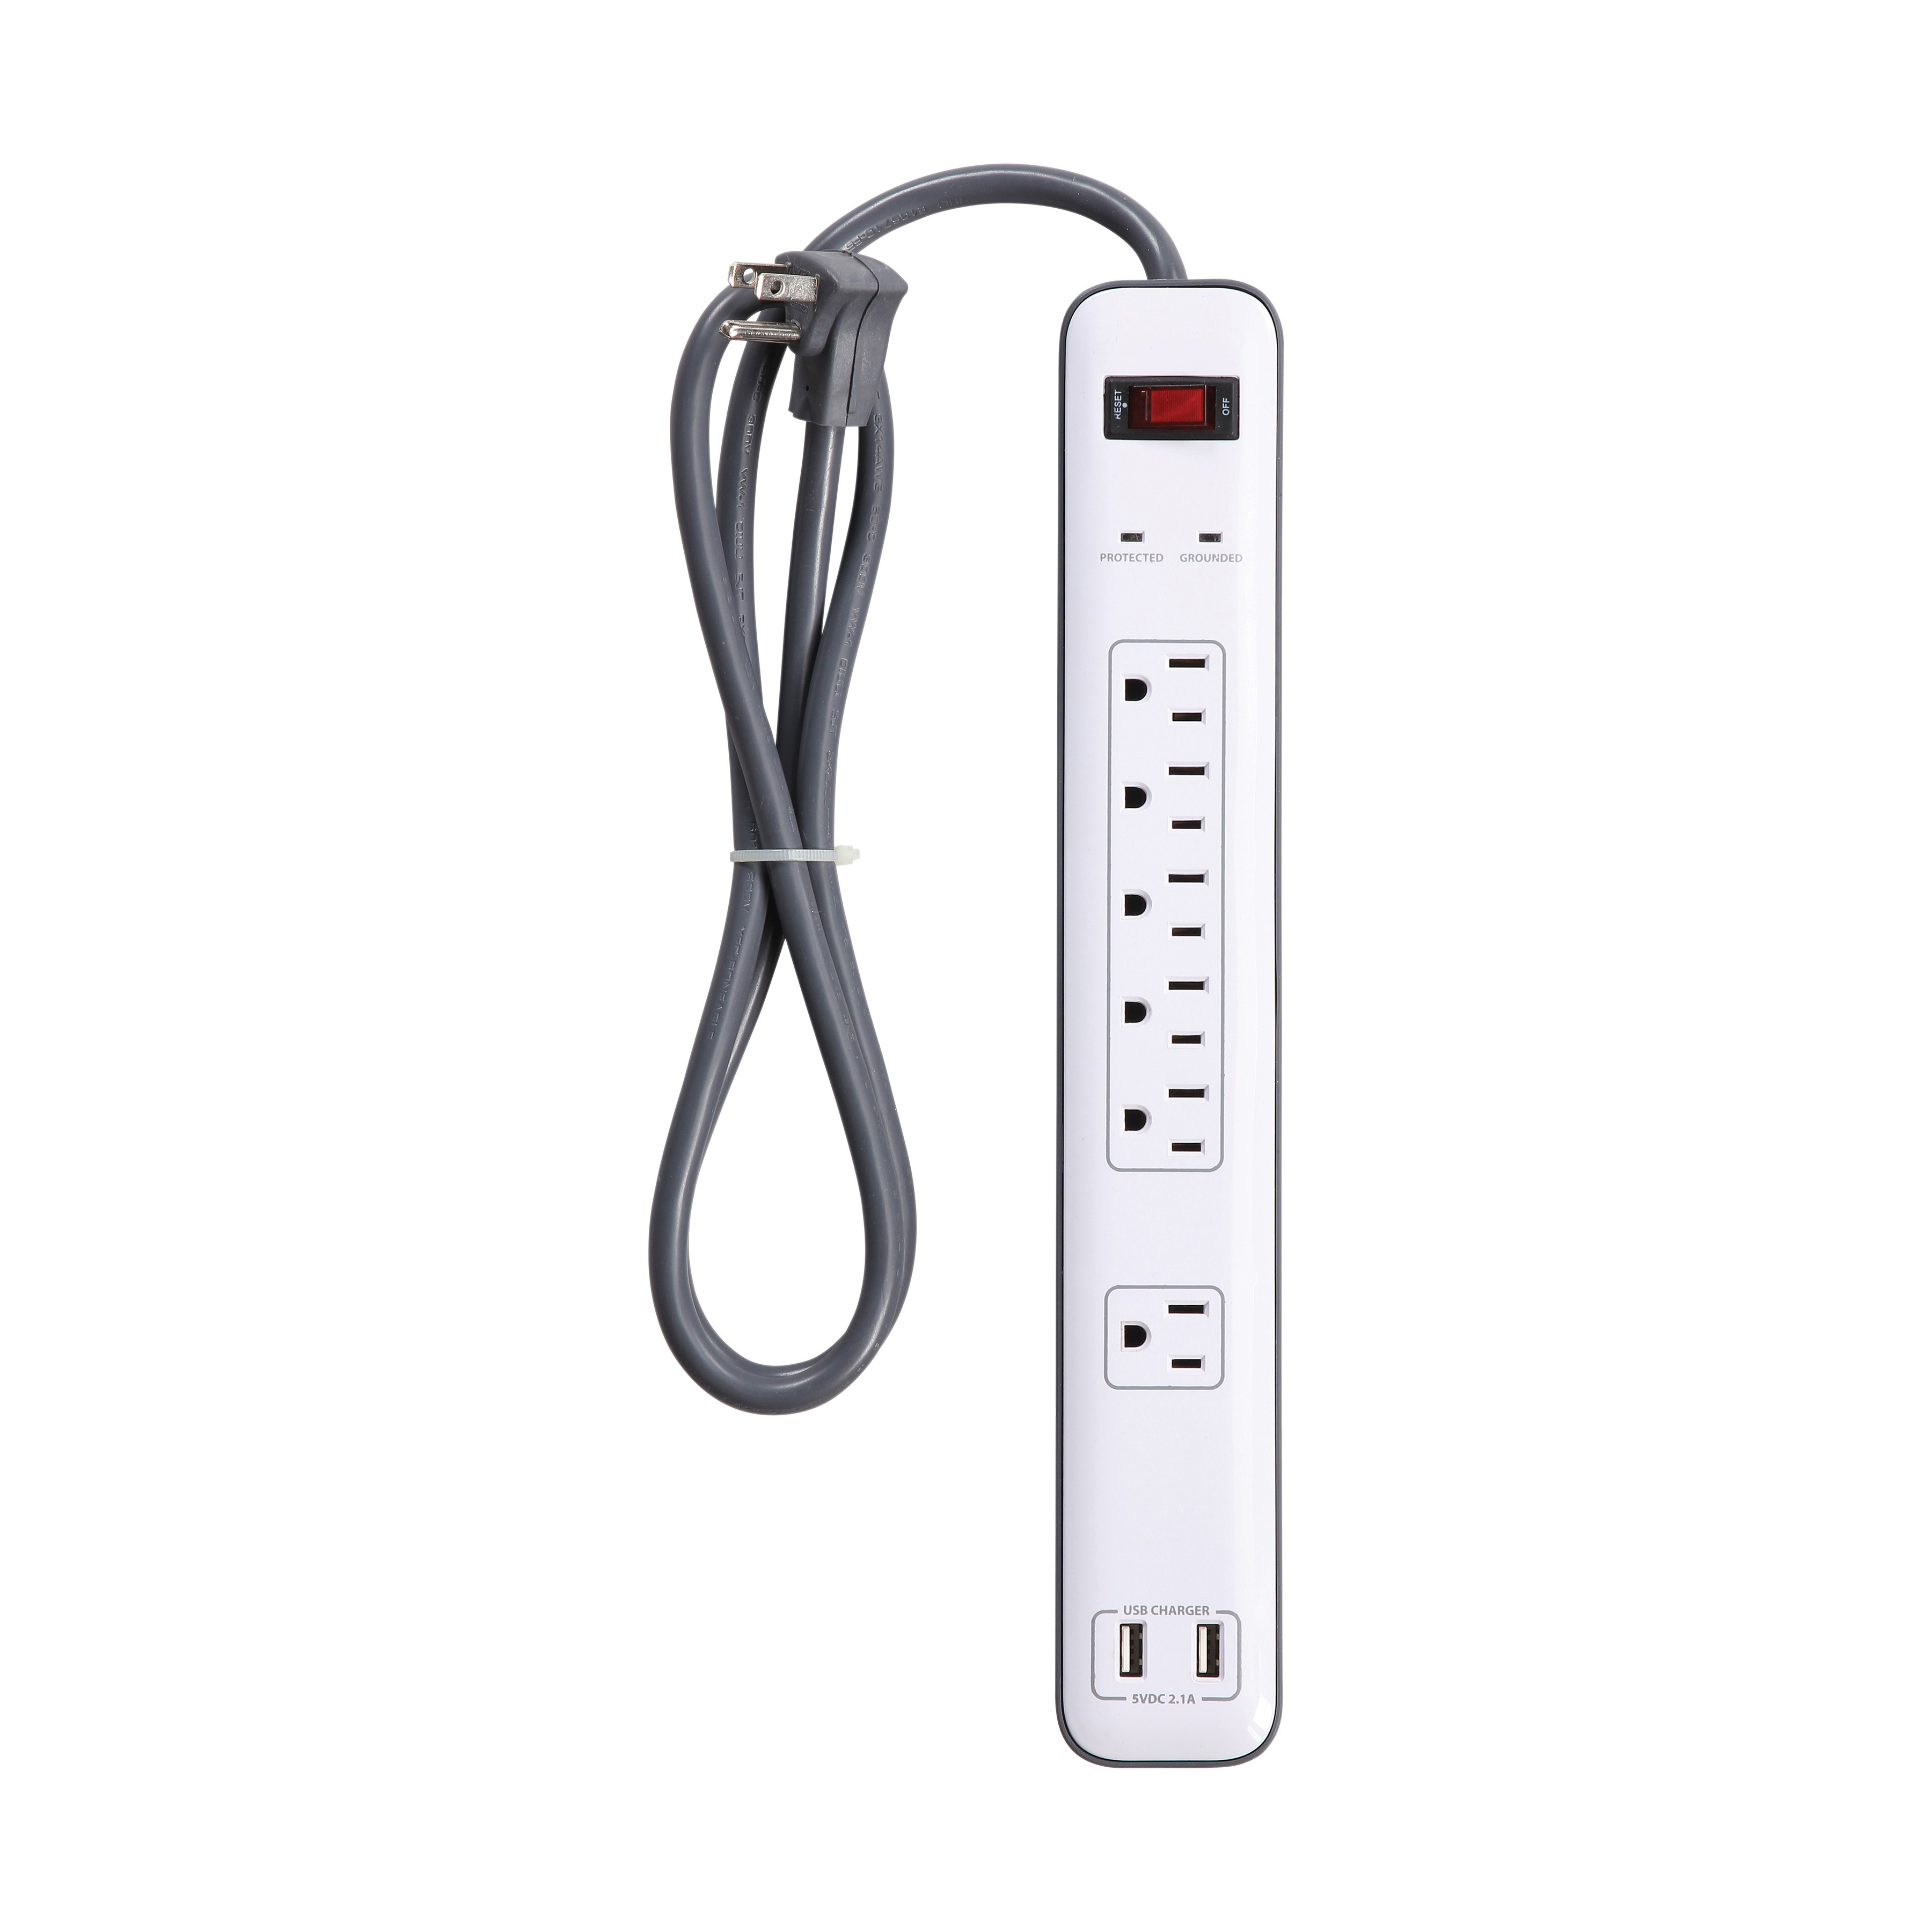 OR525106 Surge Protector Power Strip, 125 V, 15 A, 6 Three-Prong-Outlet, White